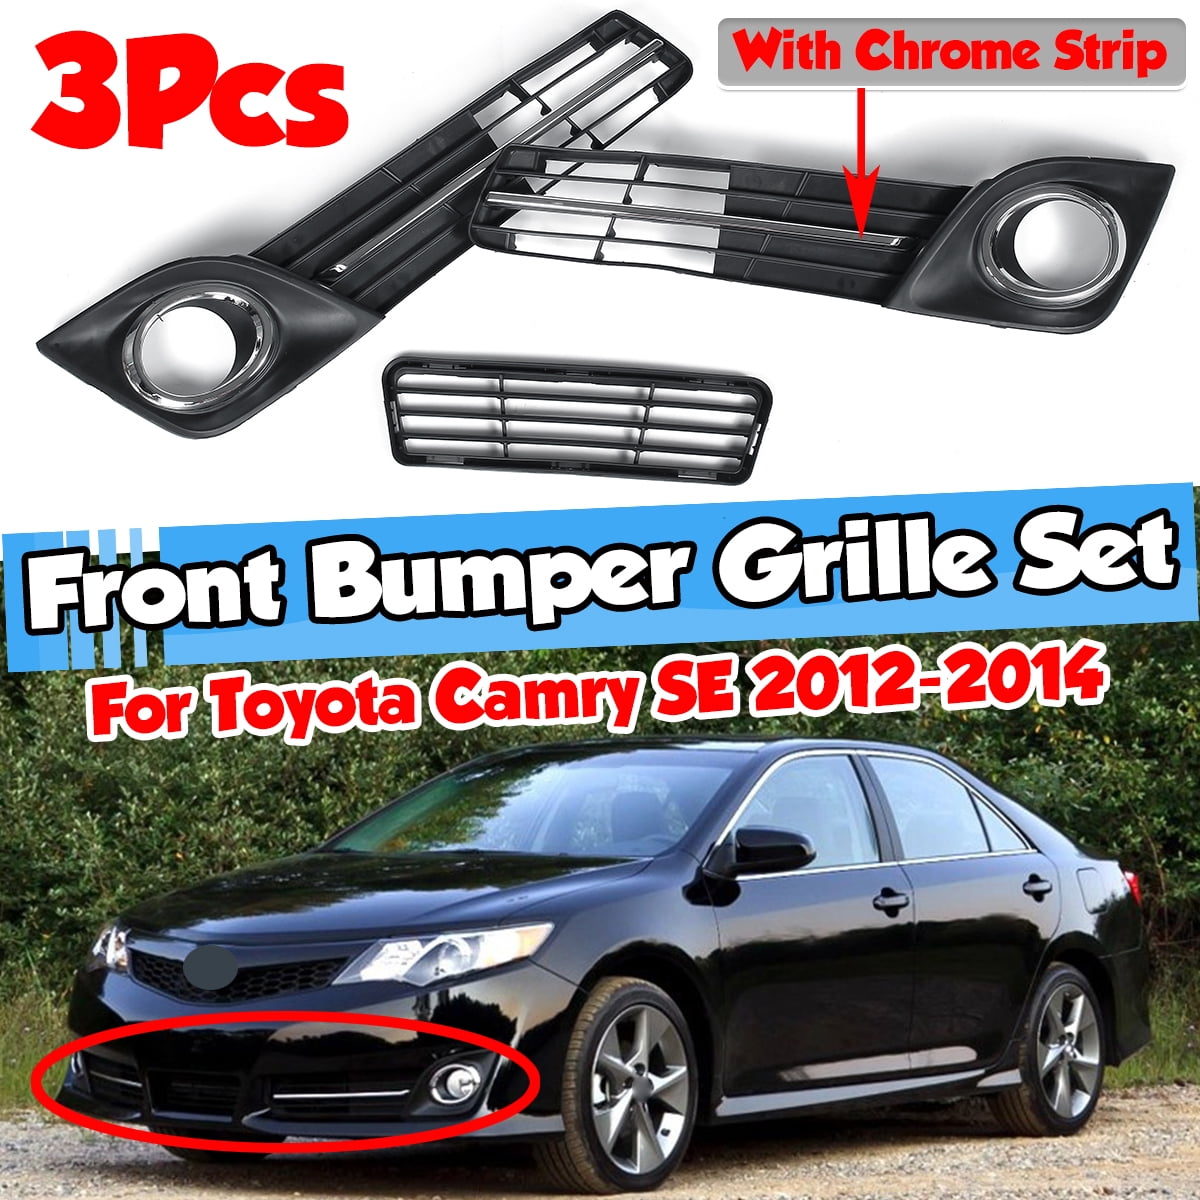 Front Bumper Cover Replacement 2012 2013 2014 Toyota Camry SE Painted To Match